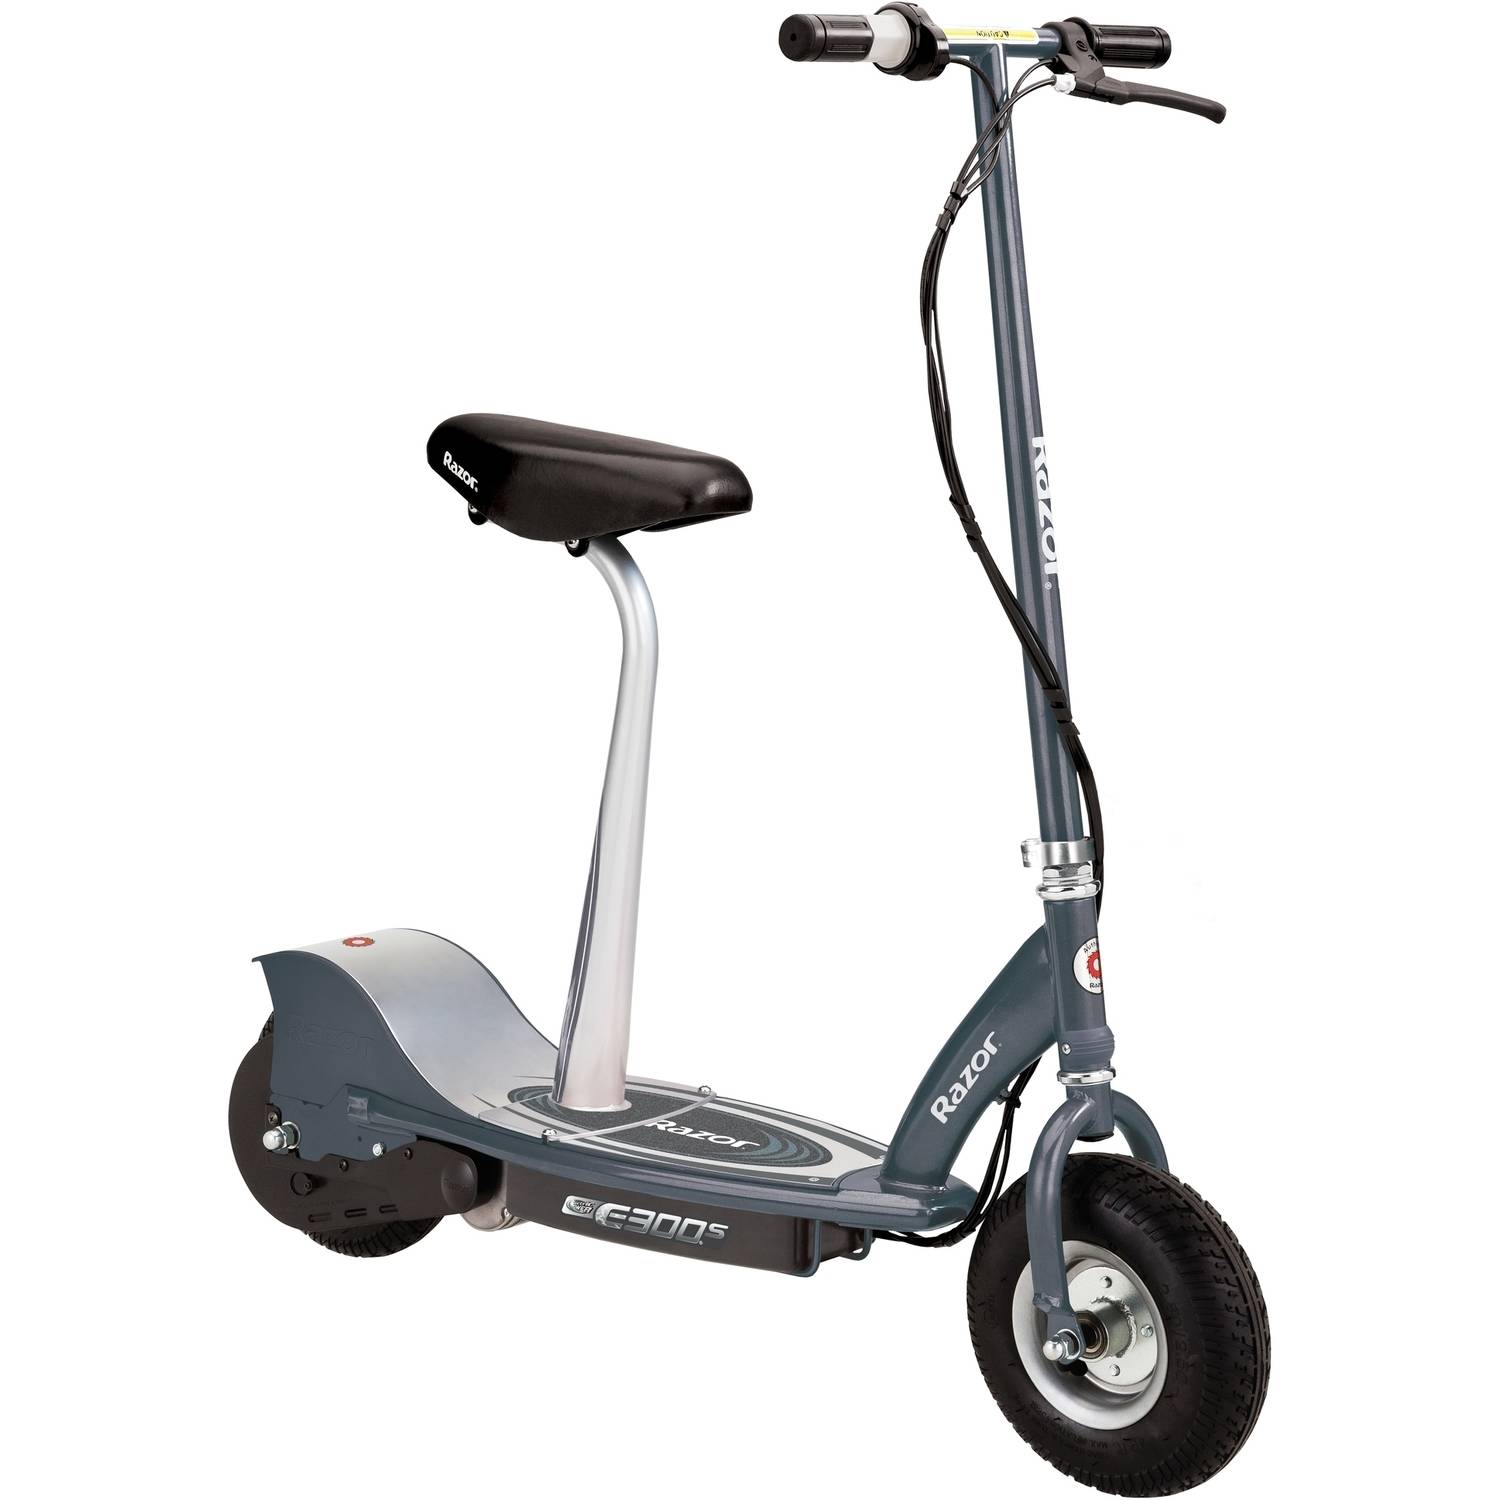 Razor E300S Seated Electric Scooter - Gray, for Ages 13+ and up to 220 lbs, 9" Pneumatic Front Tire, Up to 15 mph & up to 10-mile Range, 250W Chain Motor, 24V Sealed Lead-Acid Battery - image 1 of 12